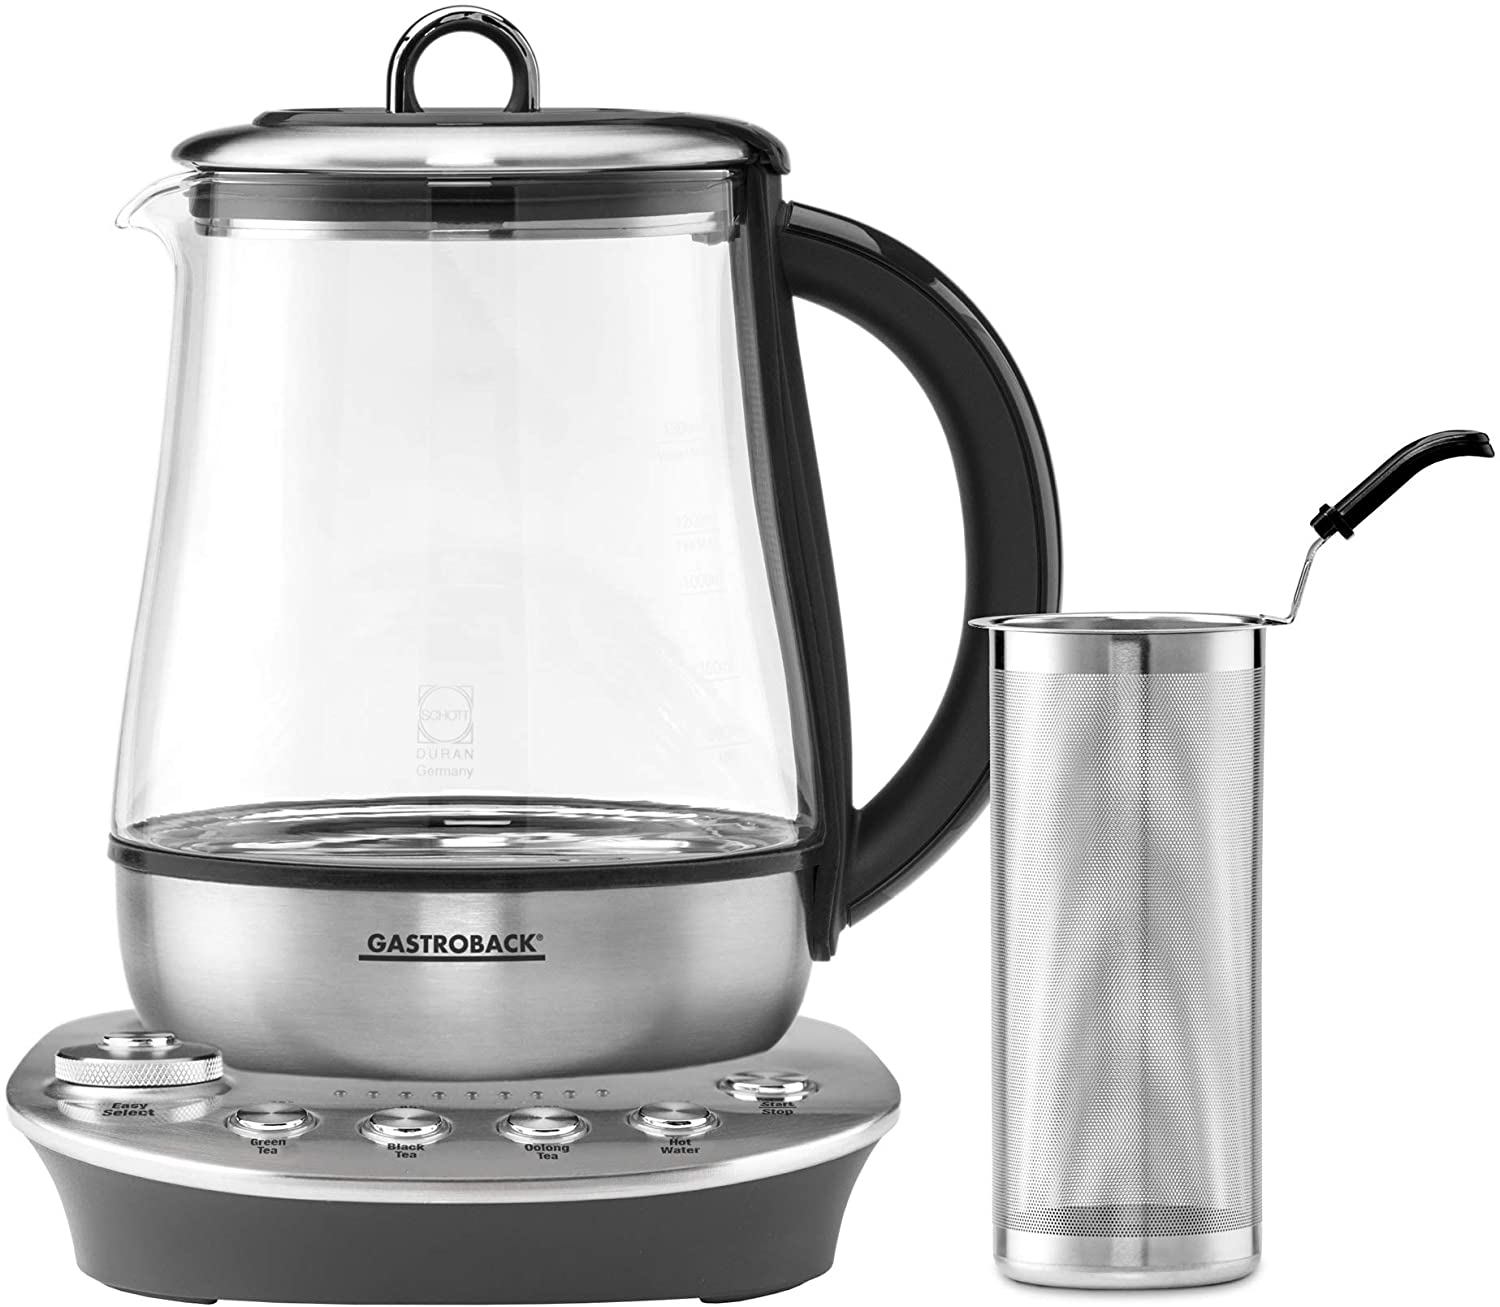 GASTROBACK 42434 Design Tea Aroma Plus Tea Kettle, Optimal Brewing Temperature and Brewing Time for Each Type of Tea, 8 Tea Programmes (60-100°C), 1.5 Litre Glass Container (Schott Duran)